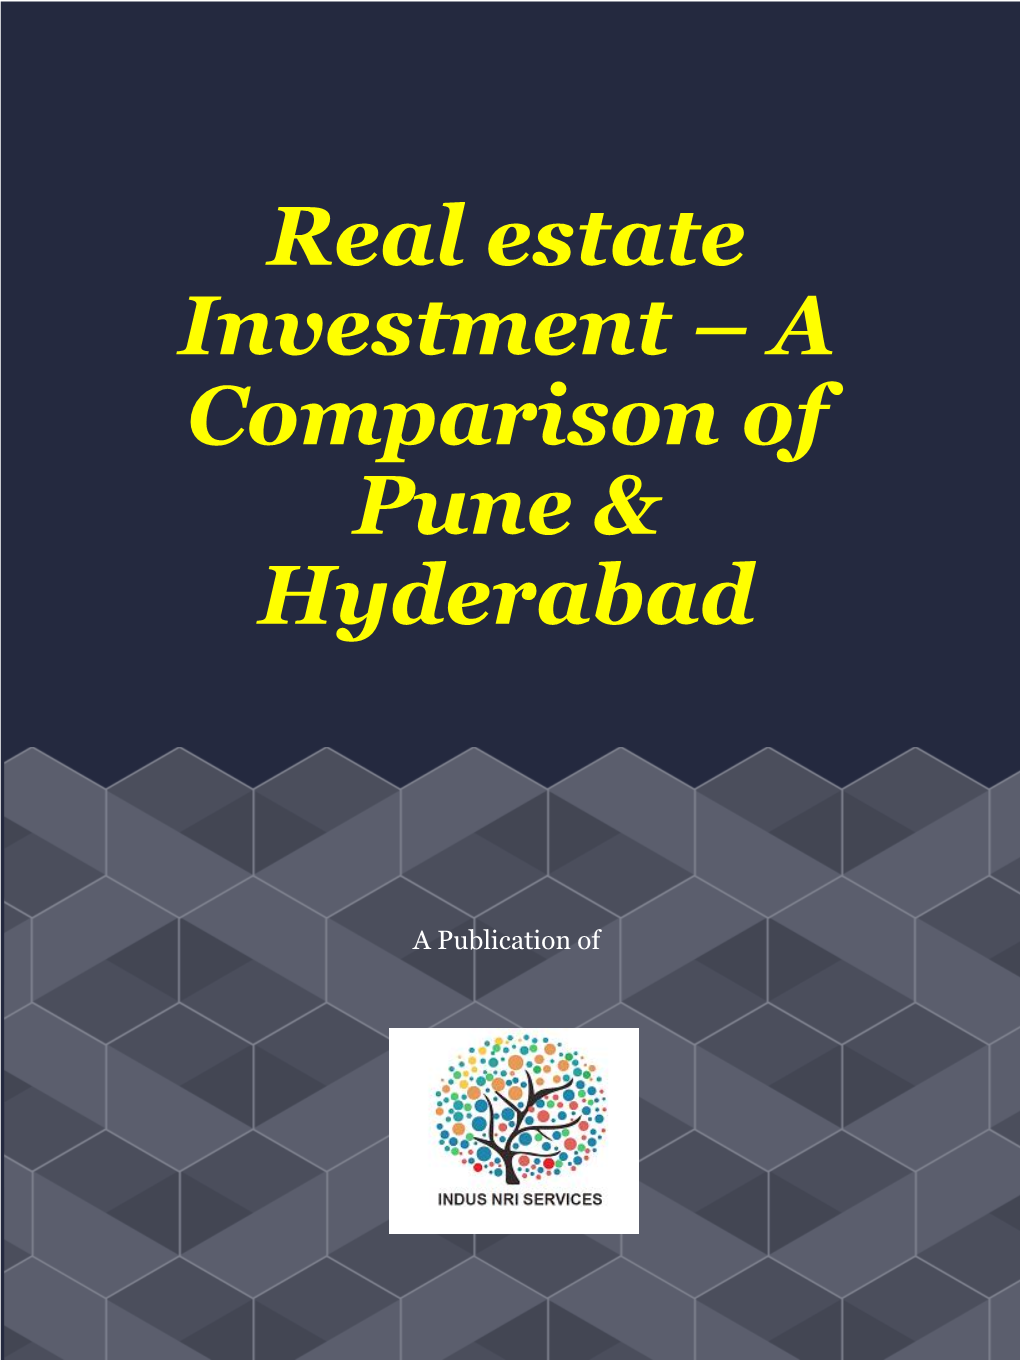 Real Estate Investment – a Comparison of Pune & Hyderabad